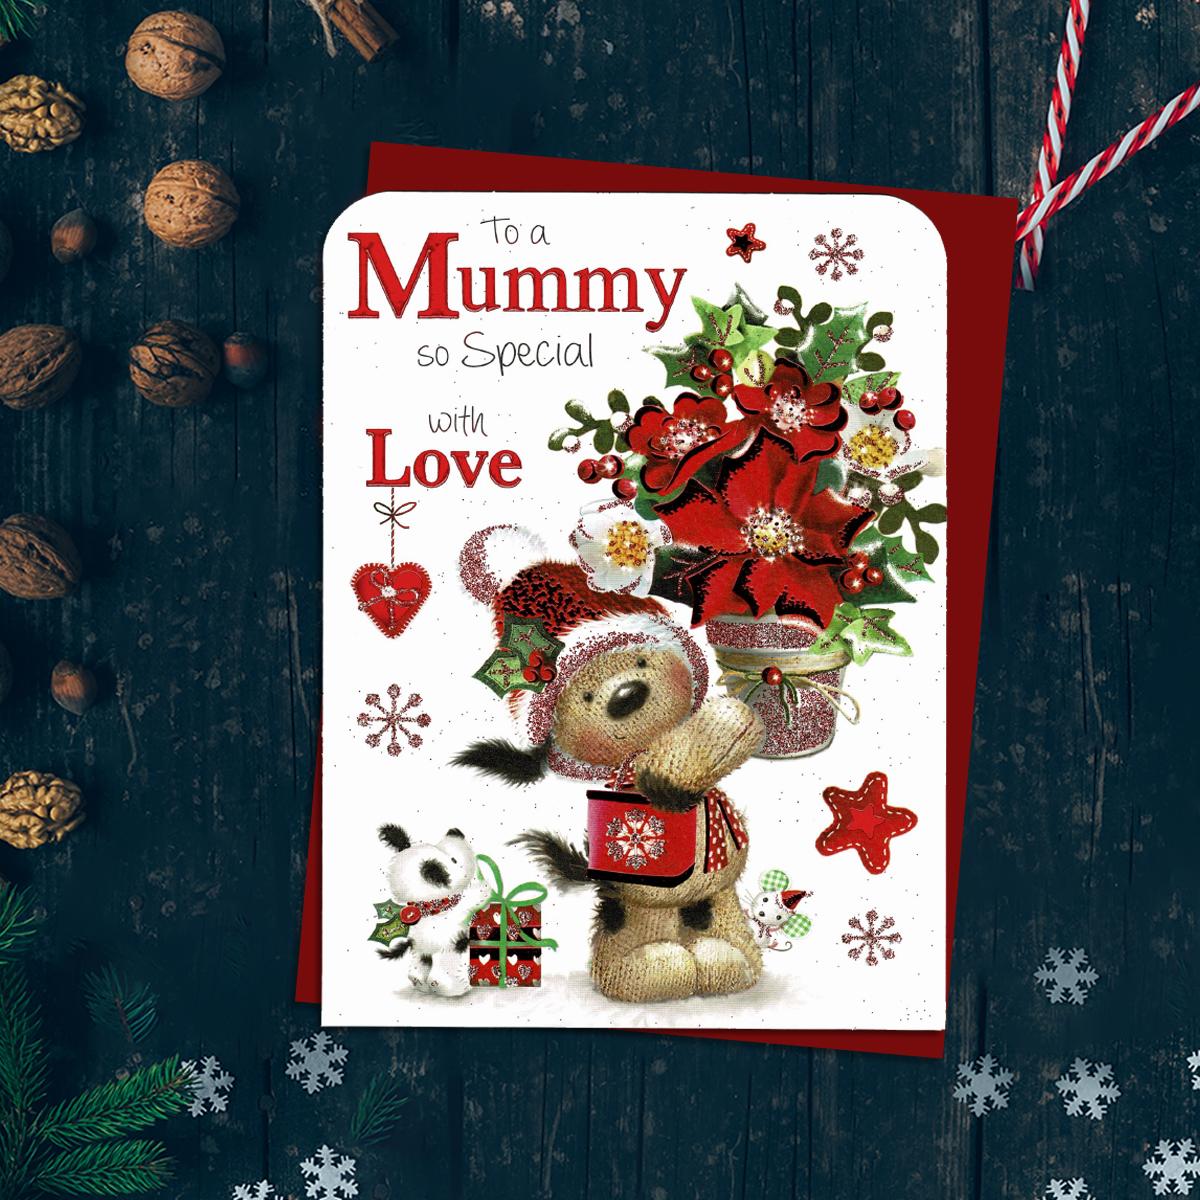 To A Mummy So Special With Love Featuring A Dog And Friends With A Huge Poinsettia! Finished With Red Foil Lettering, Red Glitter Detail And Red Envelope